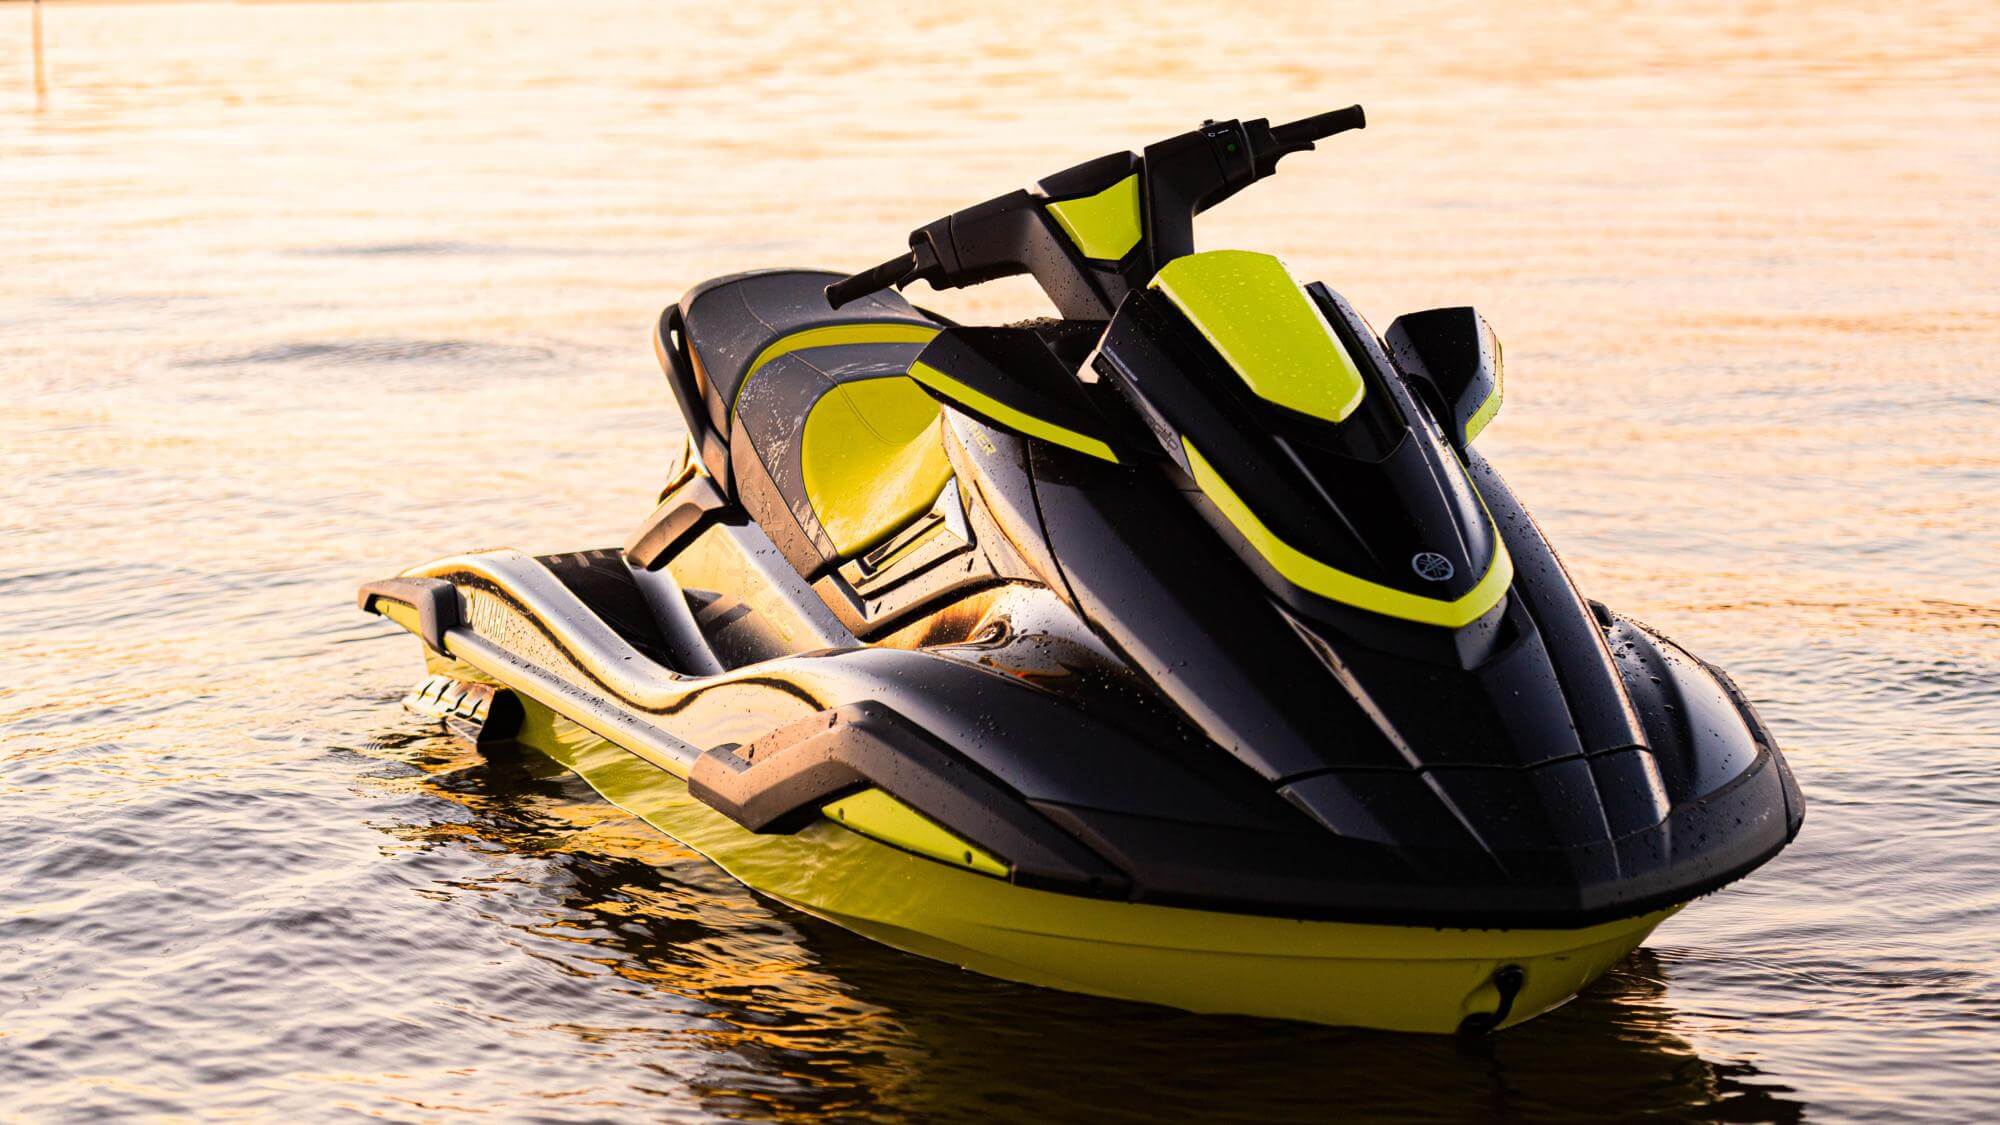 A yellow and black jet ski idle in the water with no one riding it